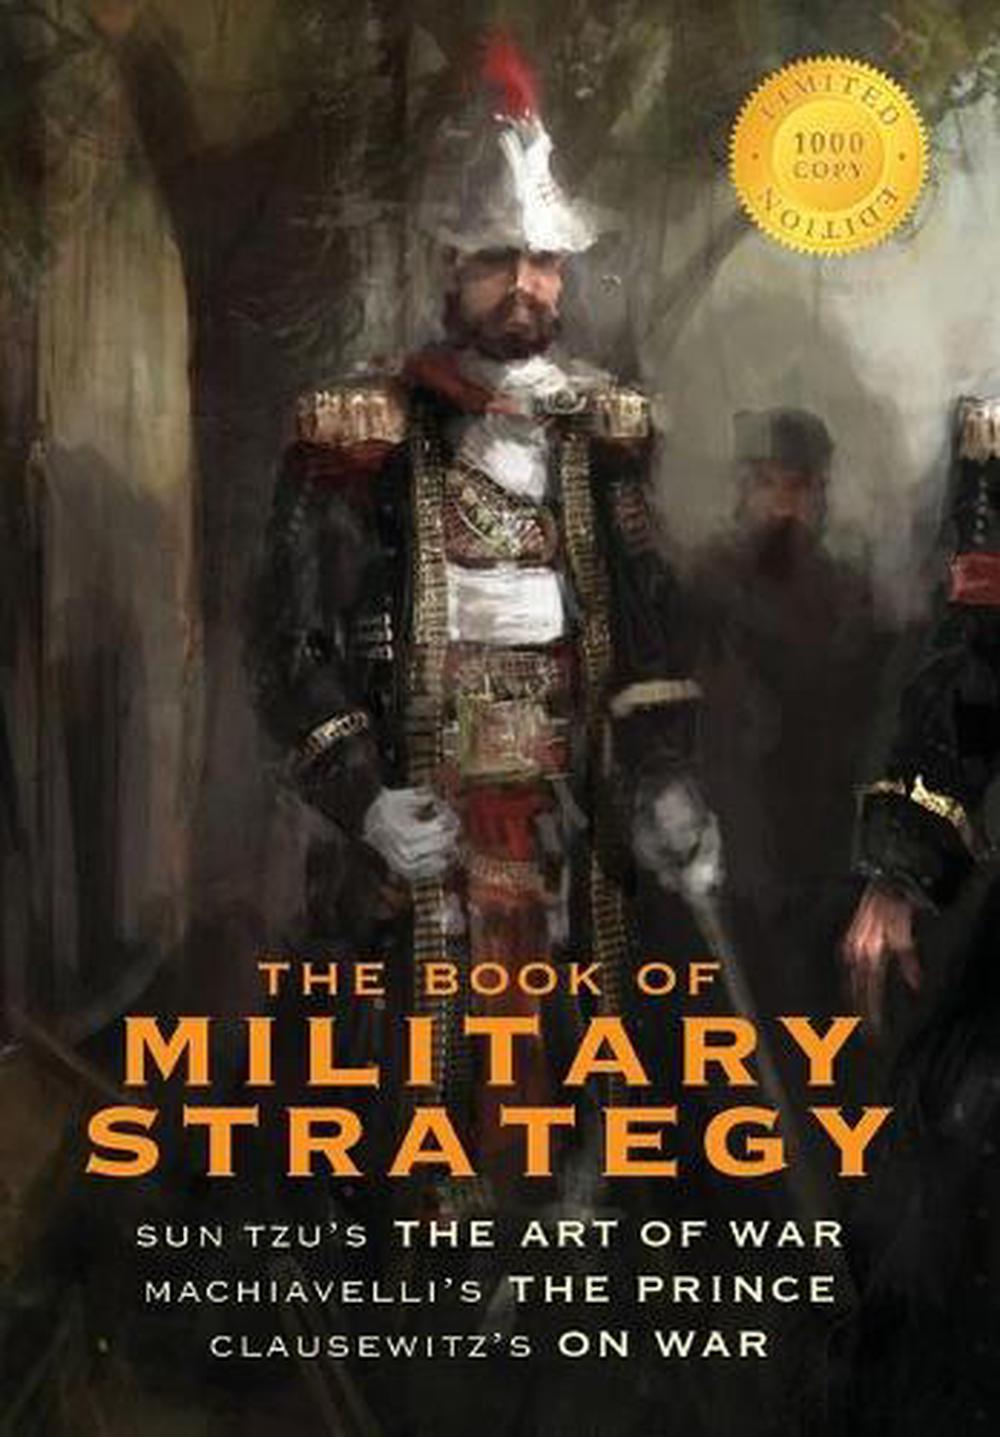 The Book of Military Strategy Sun Tzu's "The Art of War